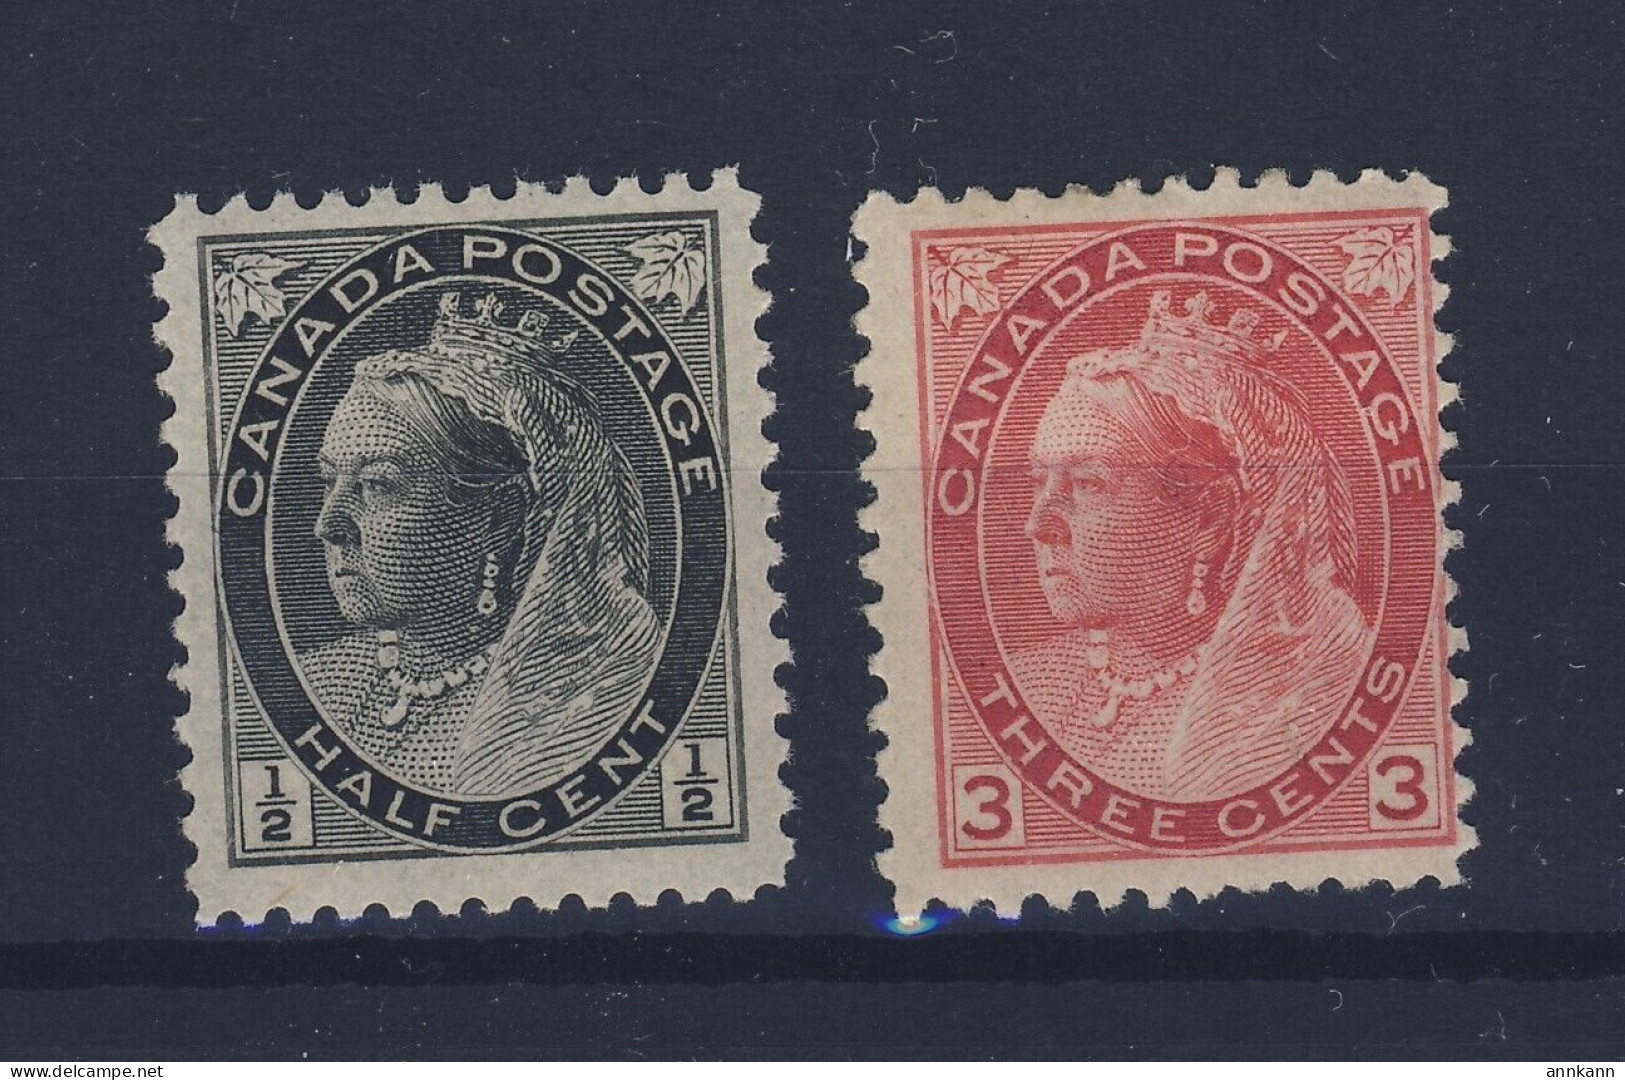 2x Canada Victoria Numeral Stamps; #74-1/2c MNH F/VF #78-3c MH F GV = $65.00 - Unused Stamps